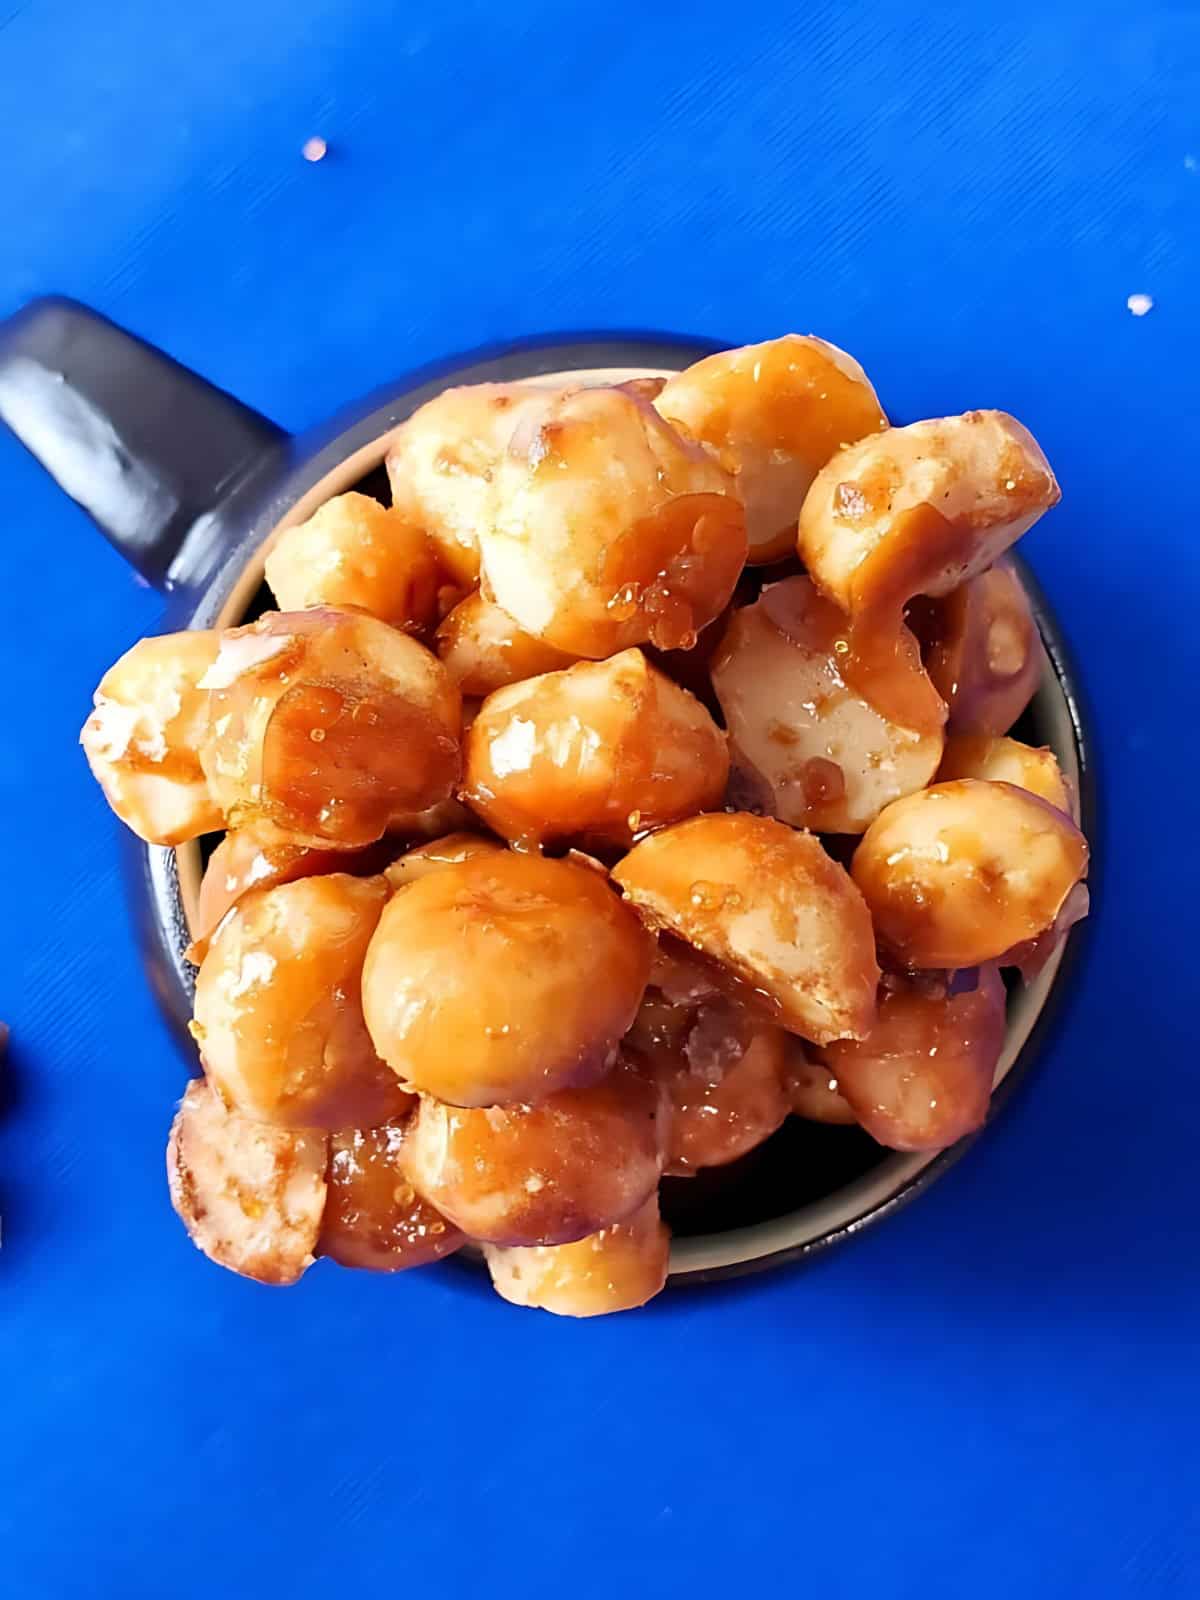 Caramelized candied macadamia nuts places in a mug.